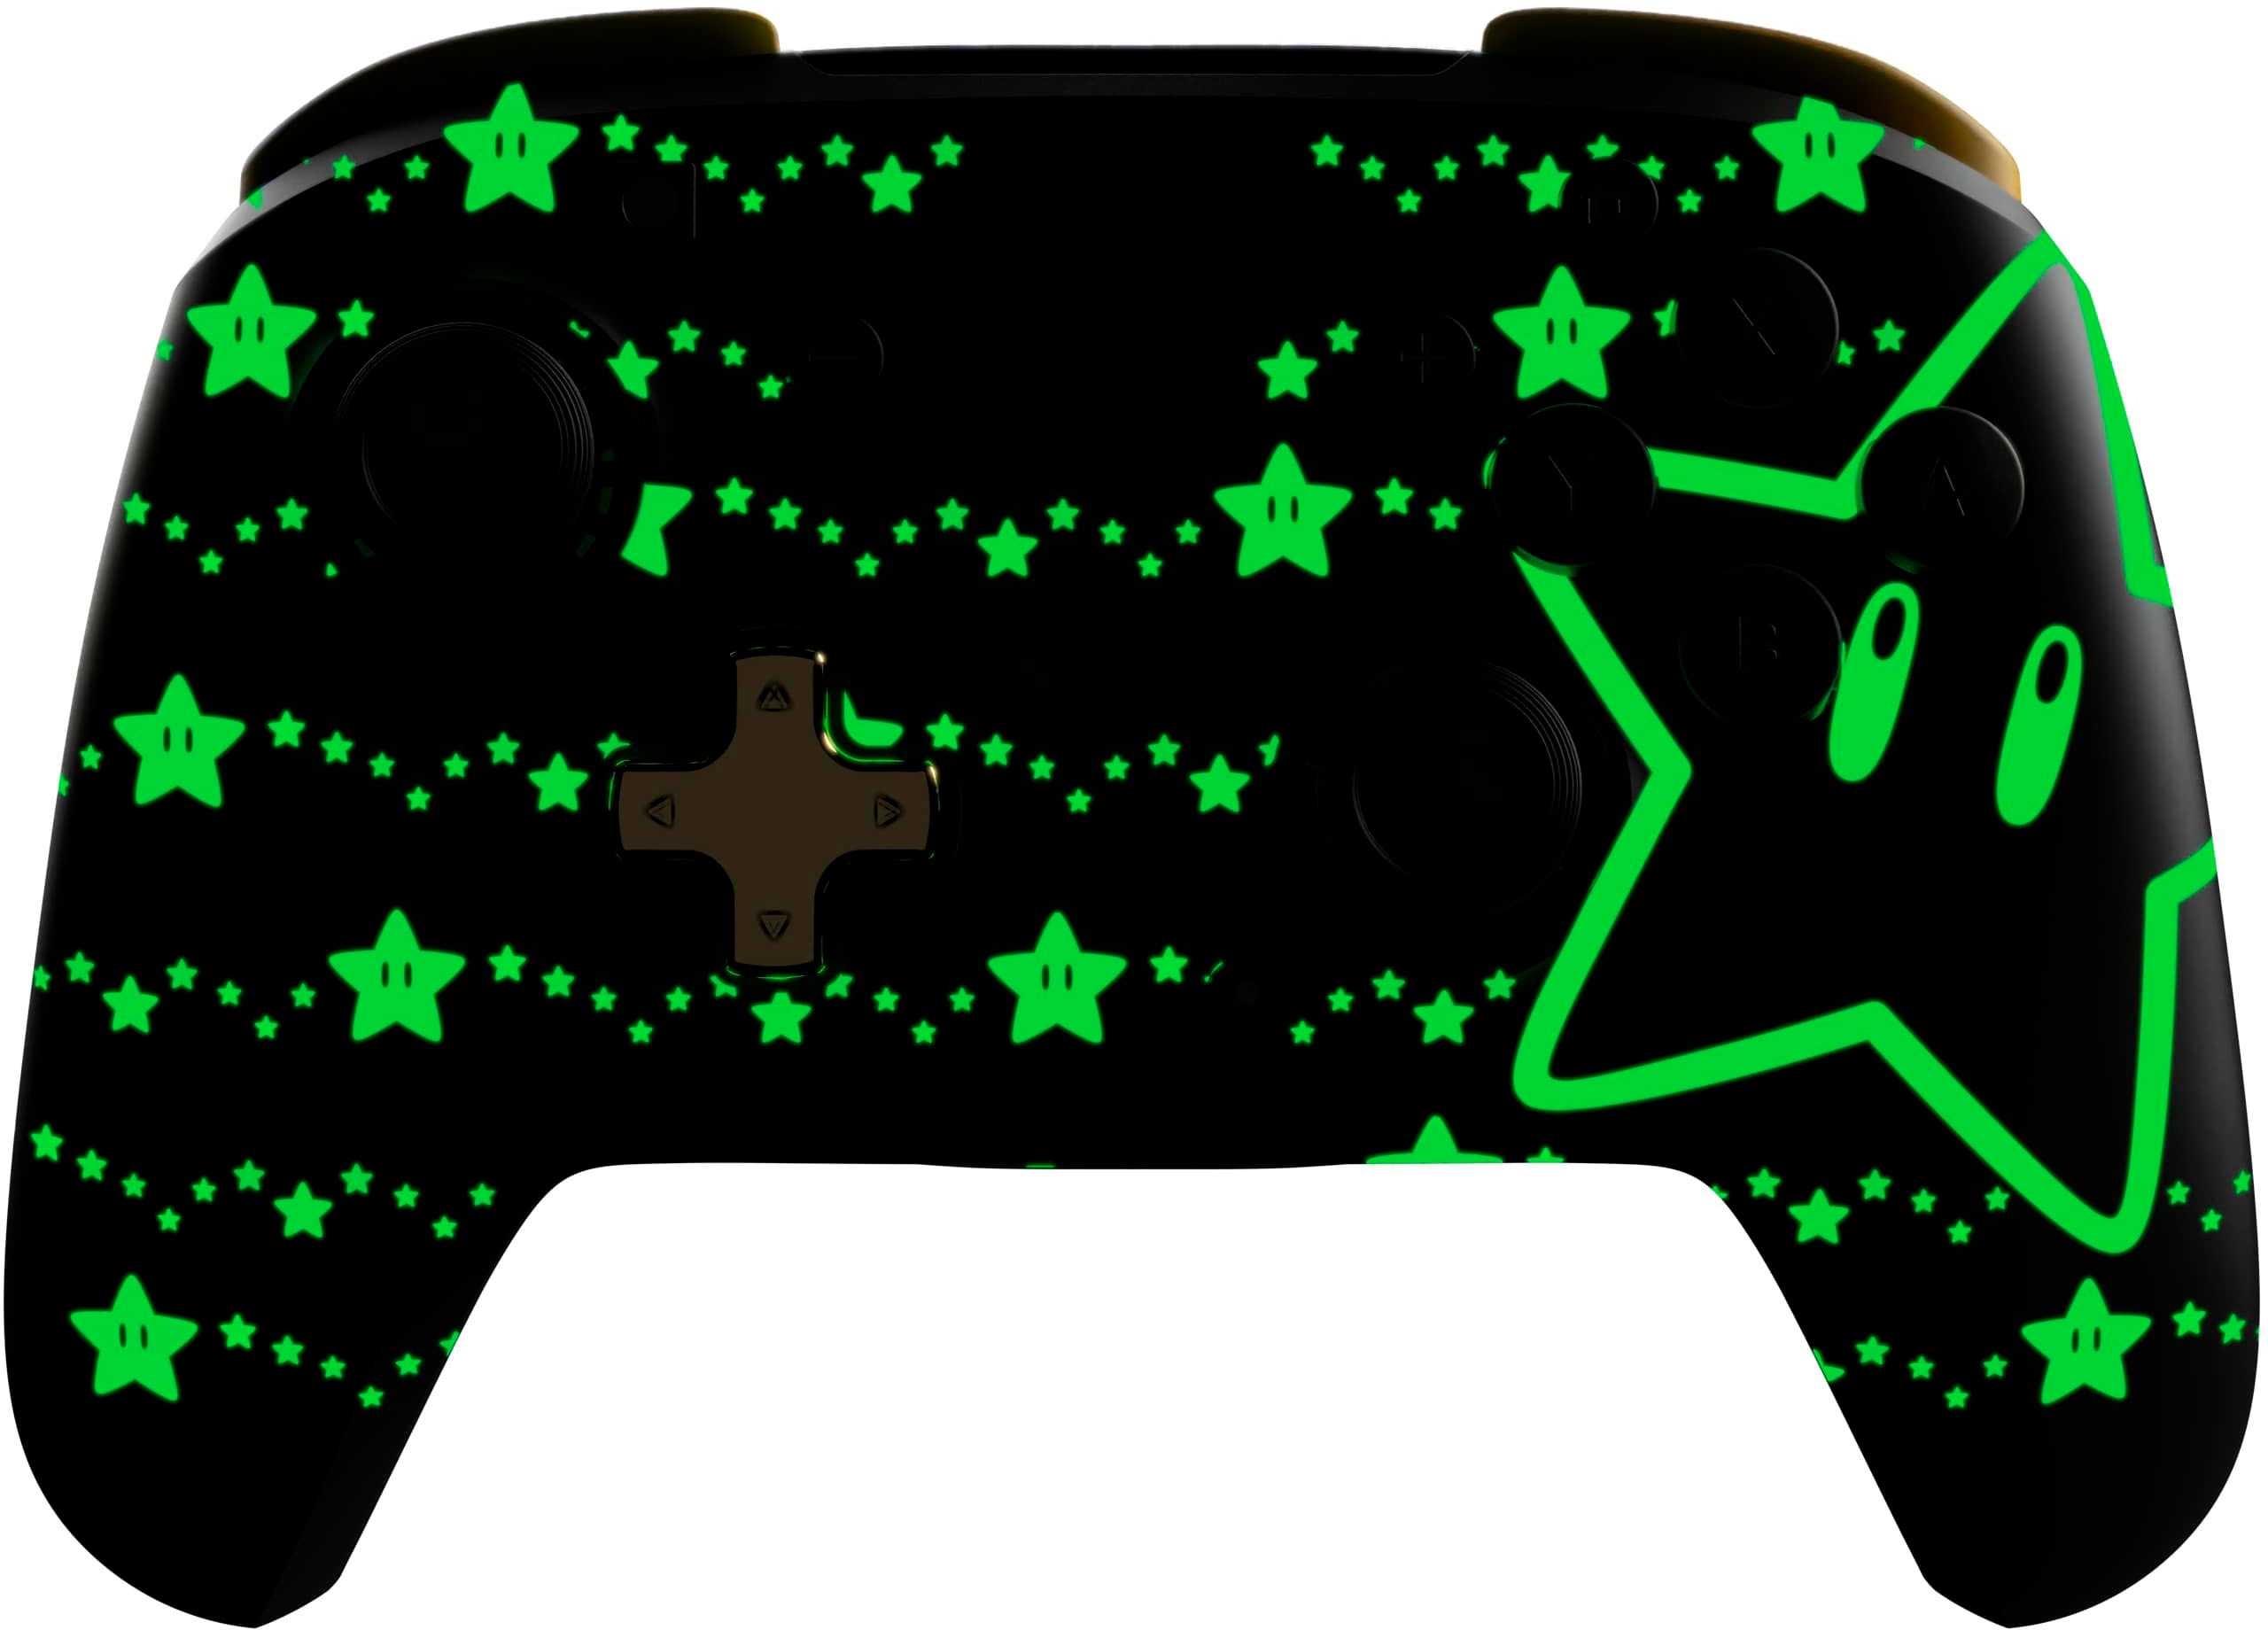 Nintendo Switch 1-UP Glow in the Dark REMATCH Controller